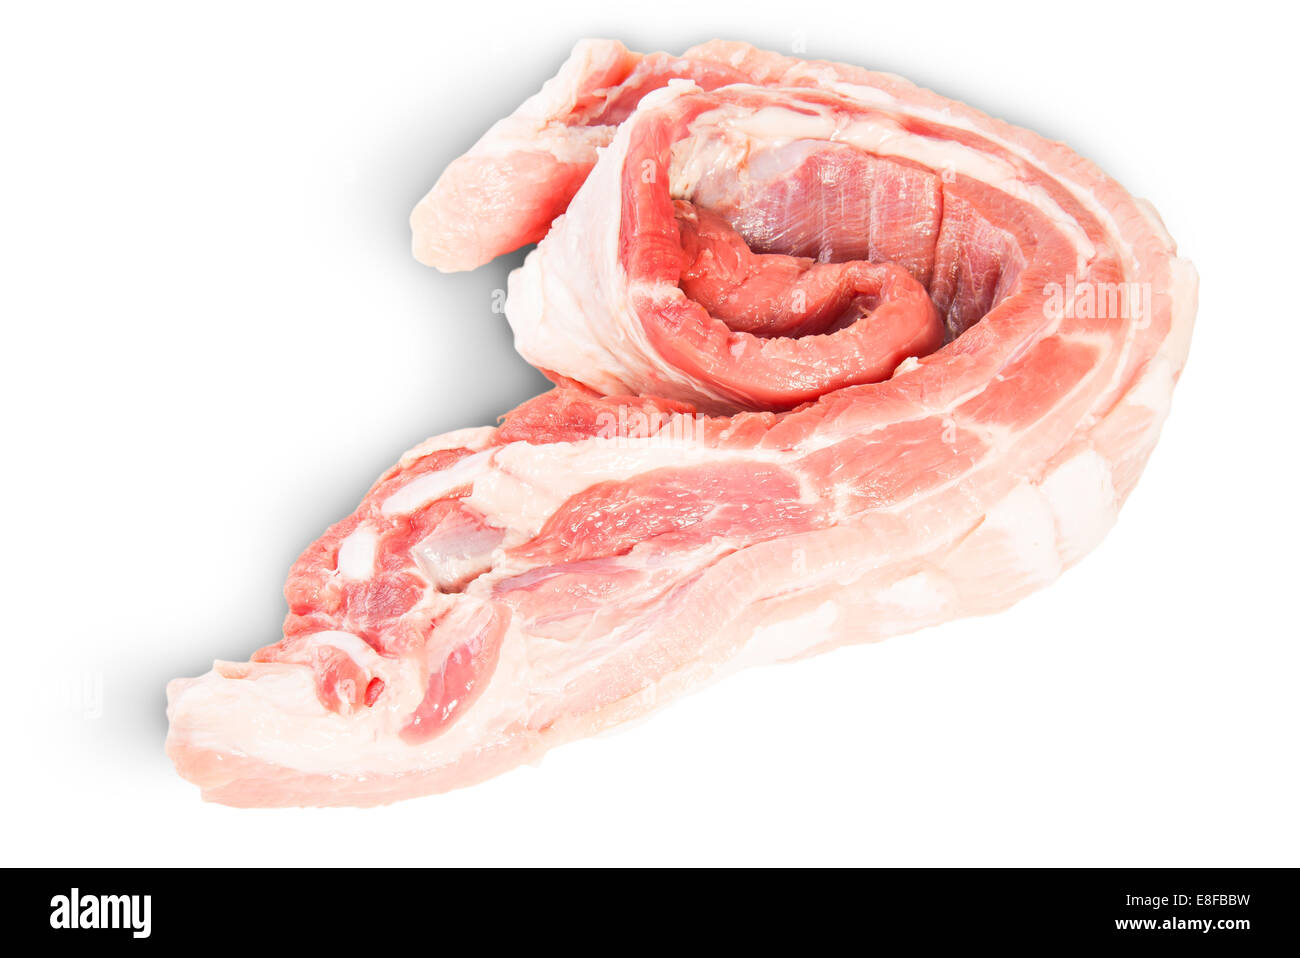 Raw Pork Ribs In The Expanded Roll Isolated On White Background Stock Photo